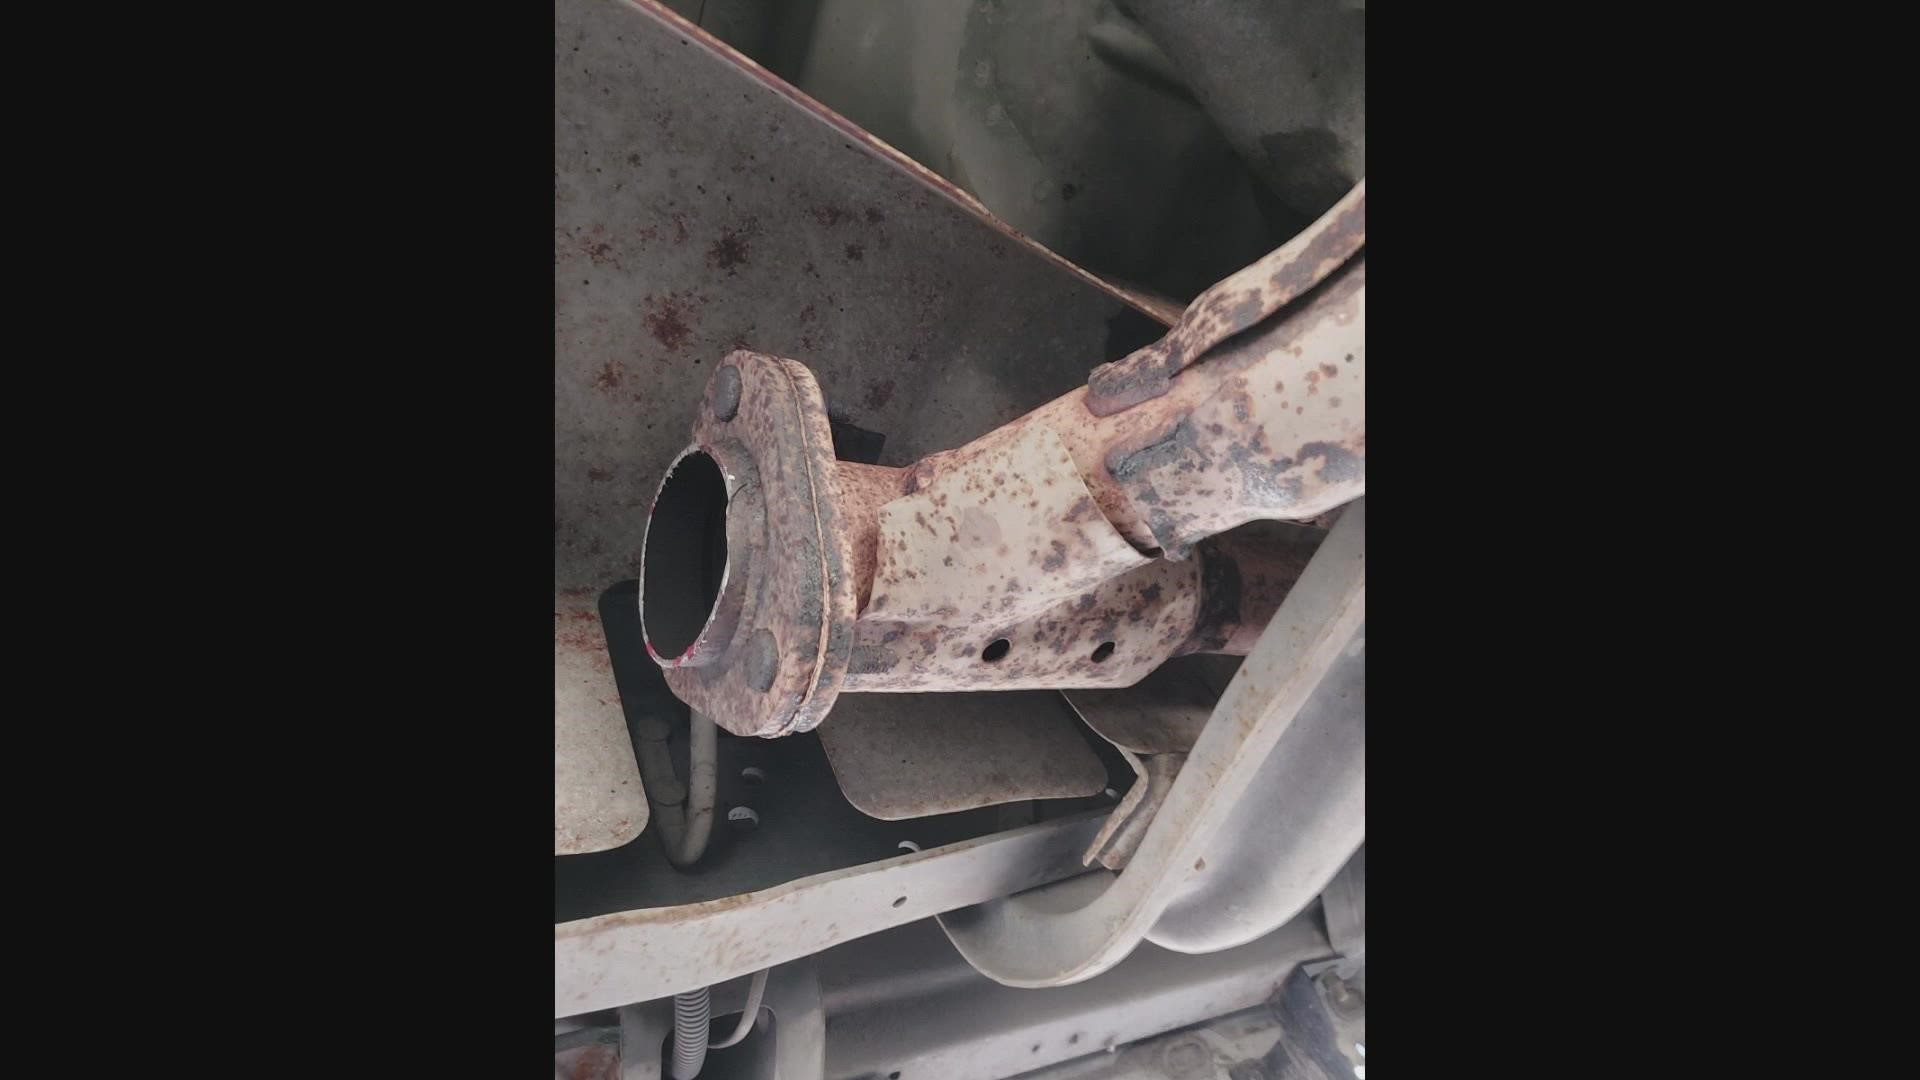 Video posted on Ring.com caught thieves in the act stealing a catalytic converter off a car in Renton’s Victoria Hills neighborhood, just after midnight on July 9th.